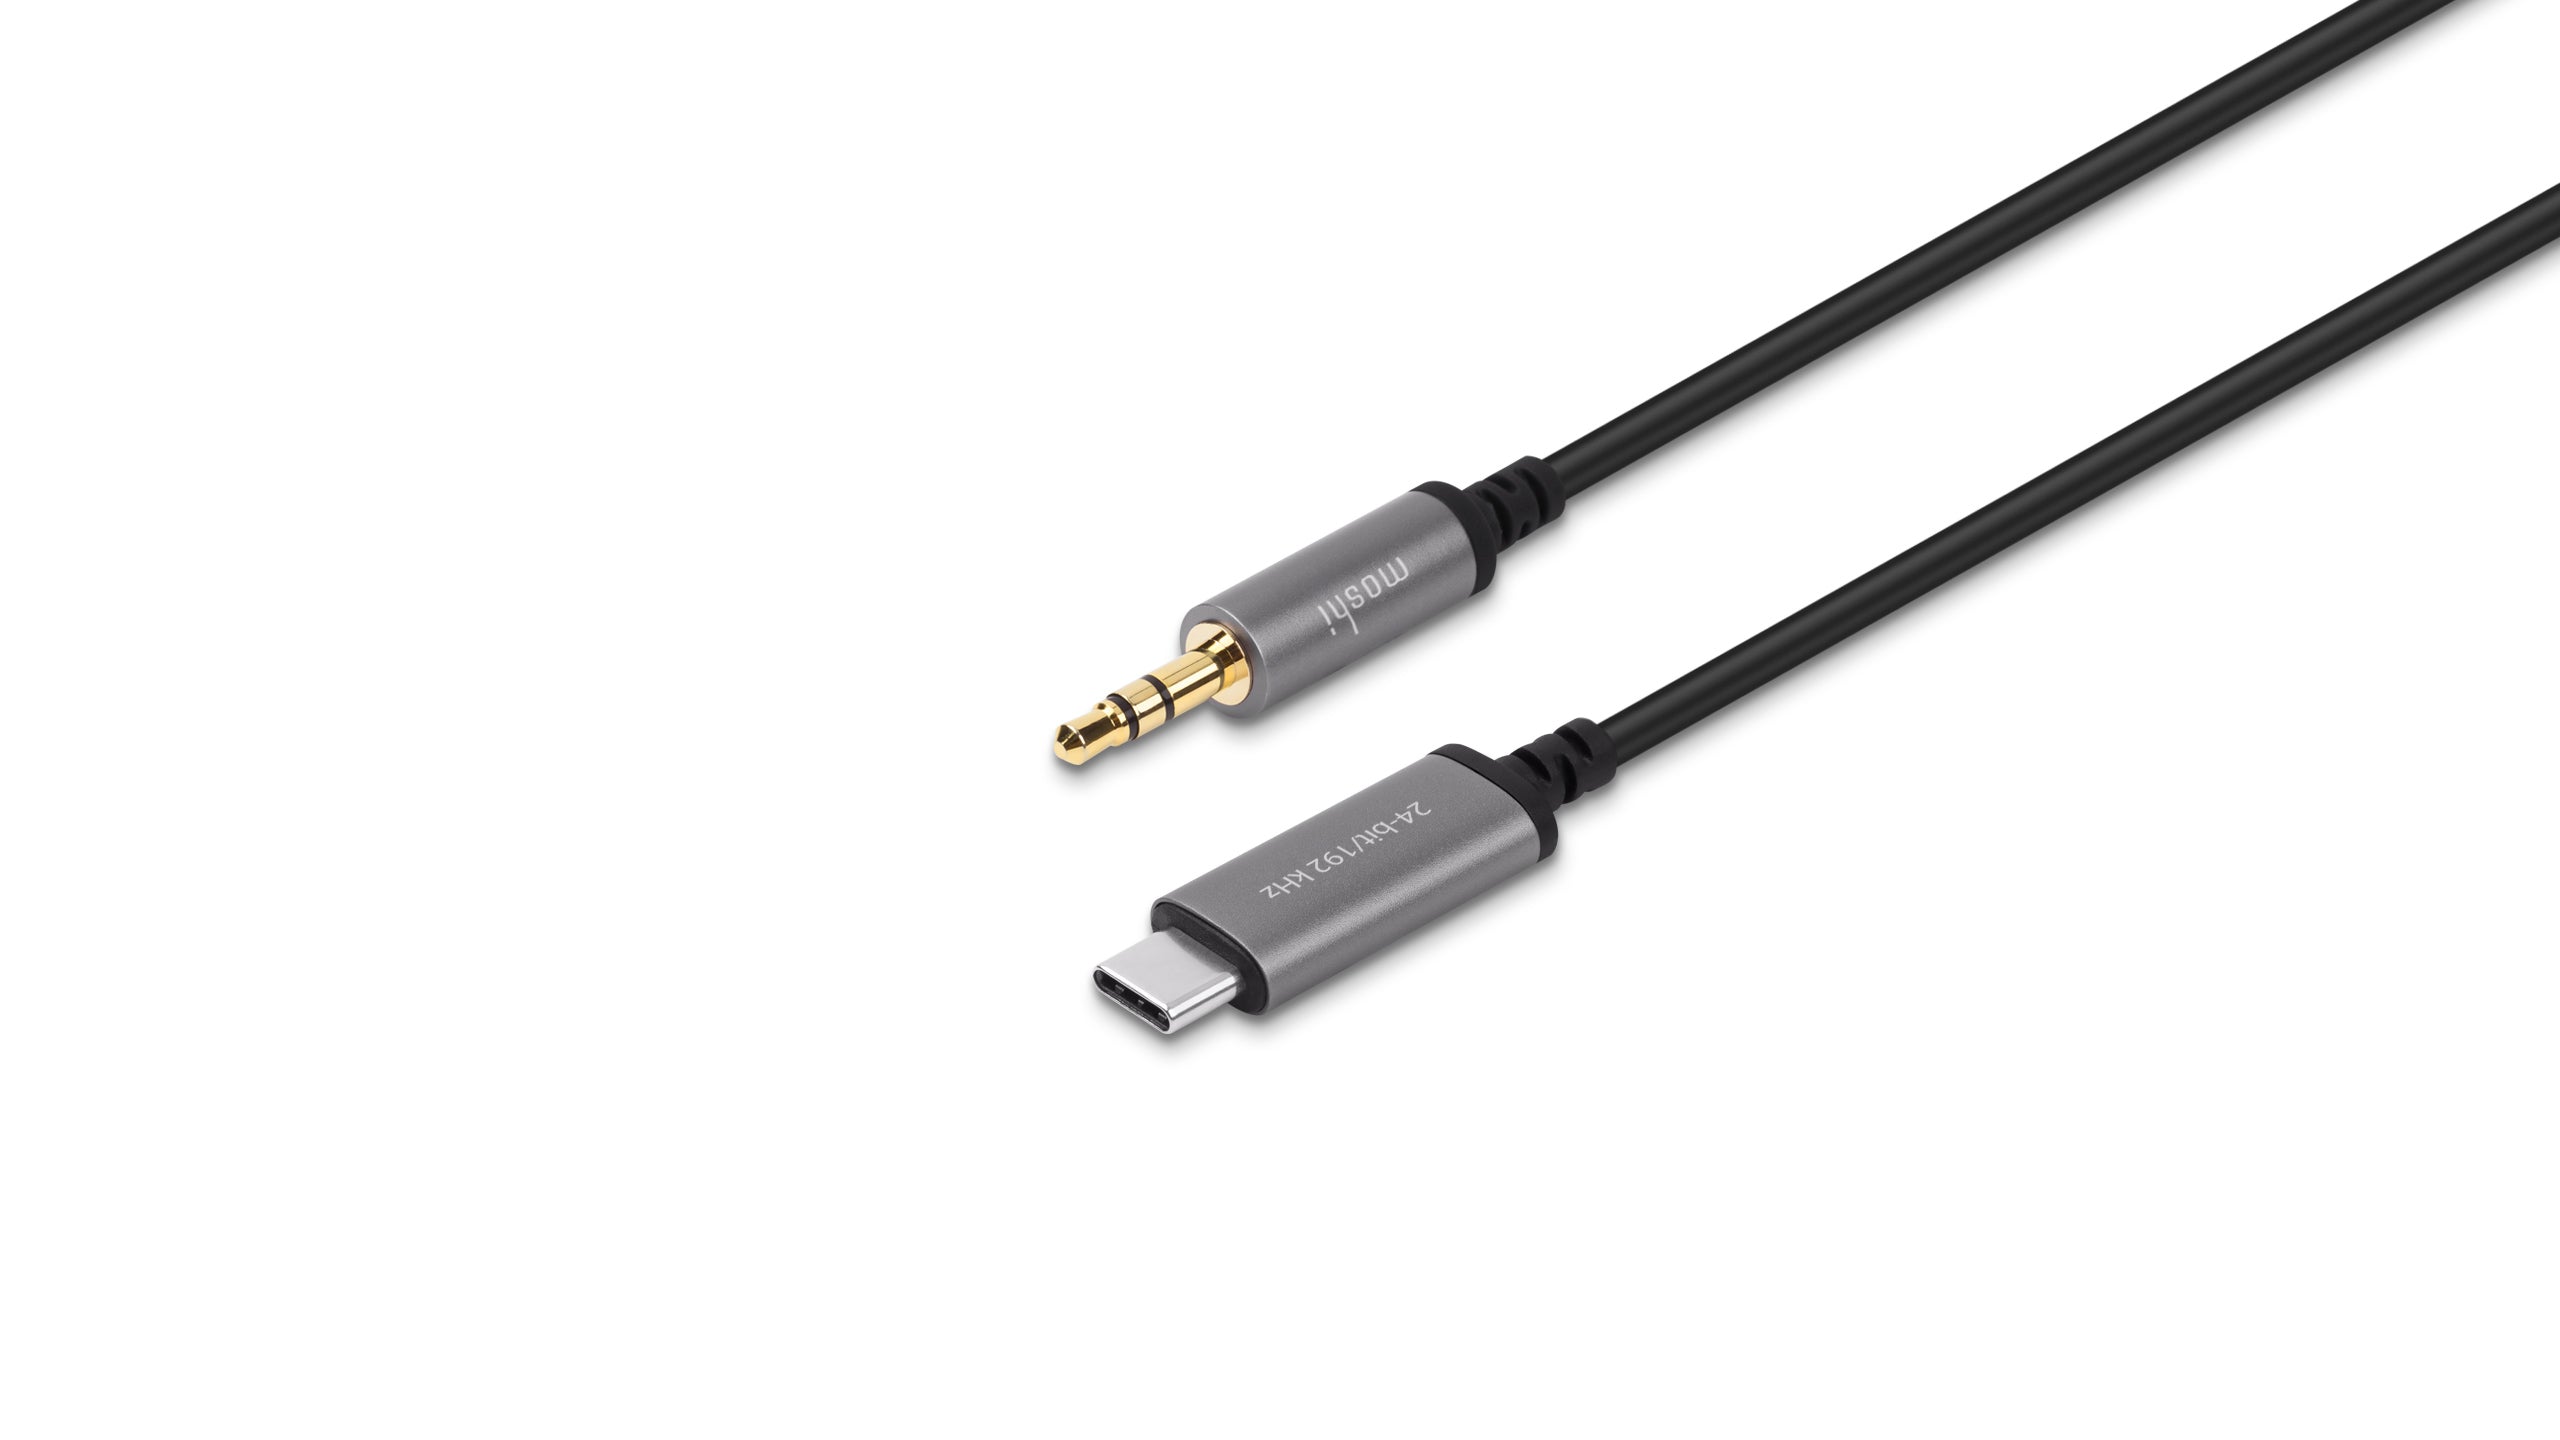 Moshi Auxiliary to USBC Cable (1.2m) Black